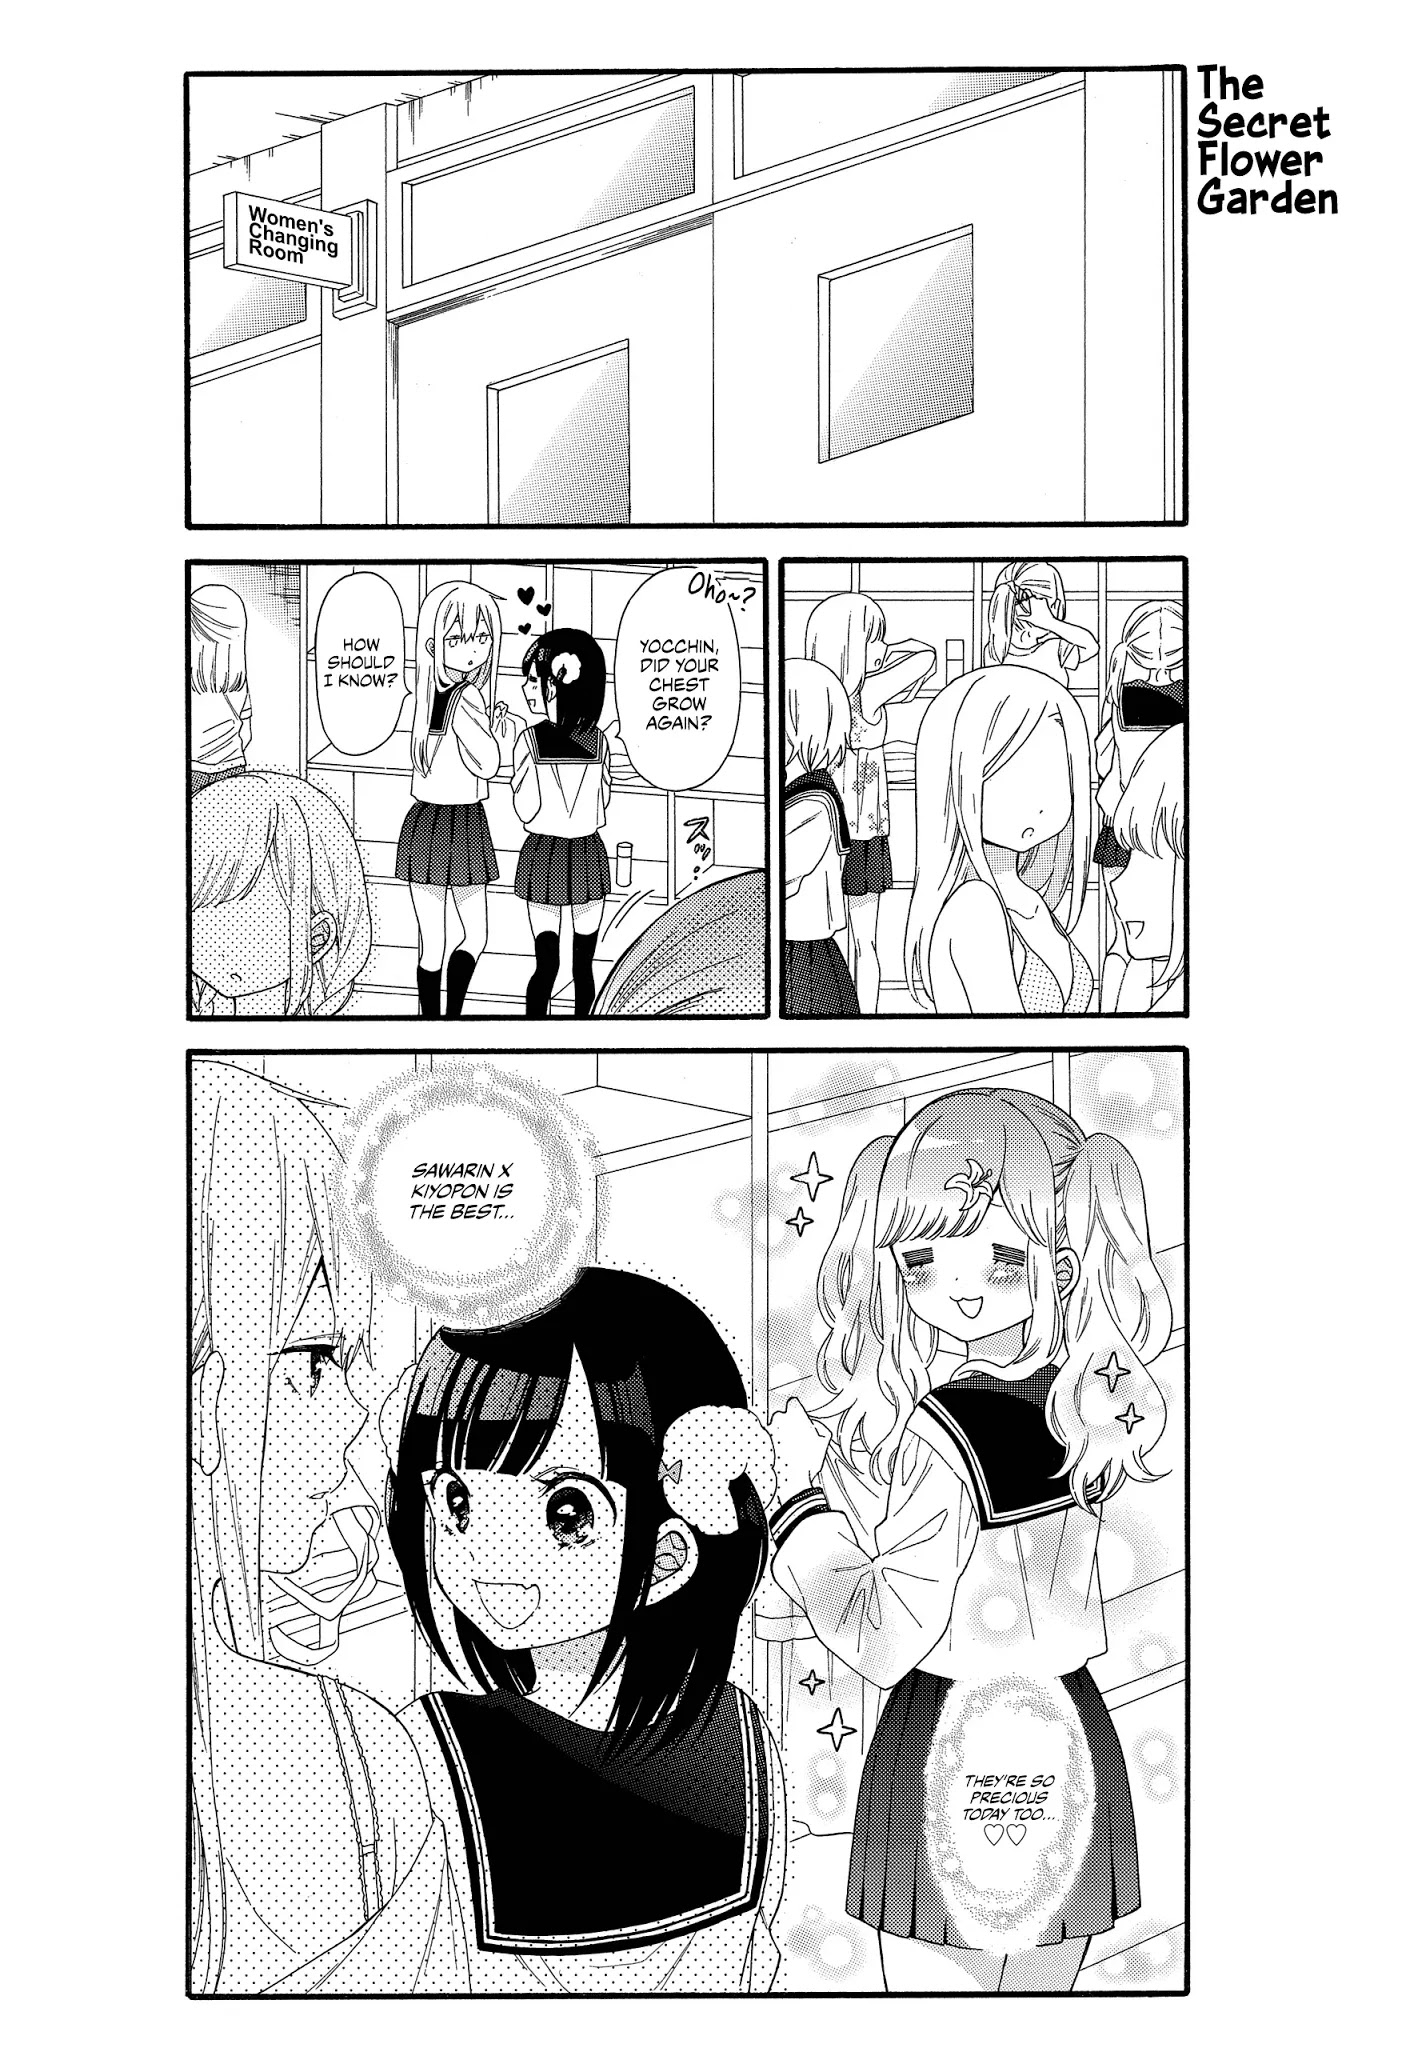 Girls X Sexual Harassment Life - Page 2